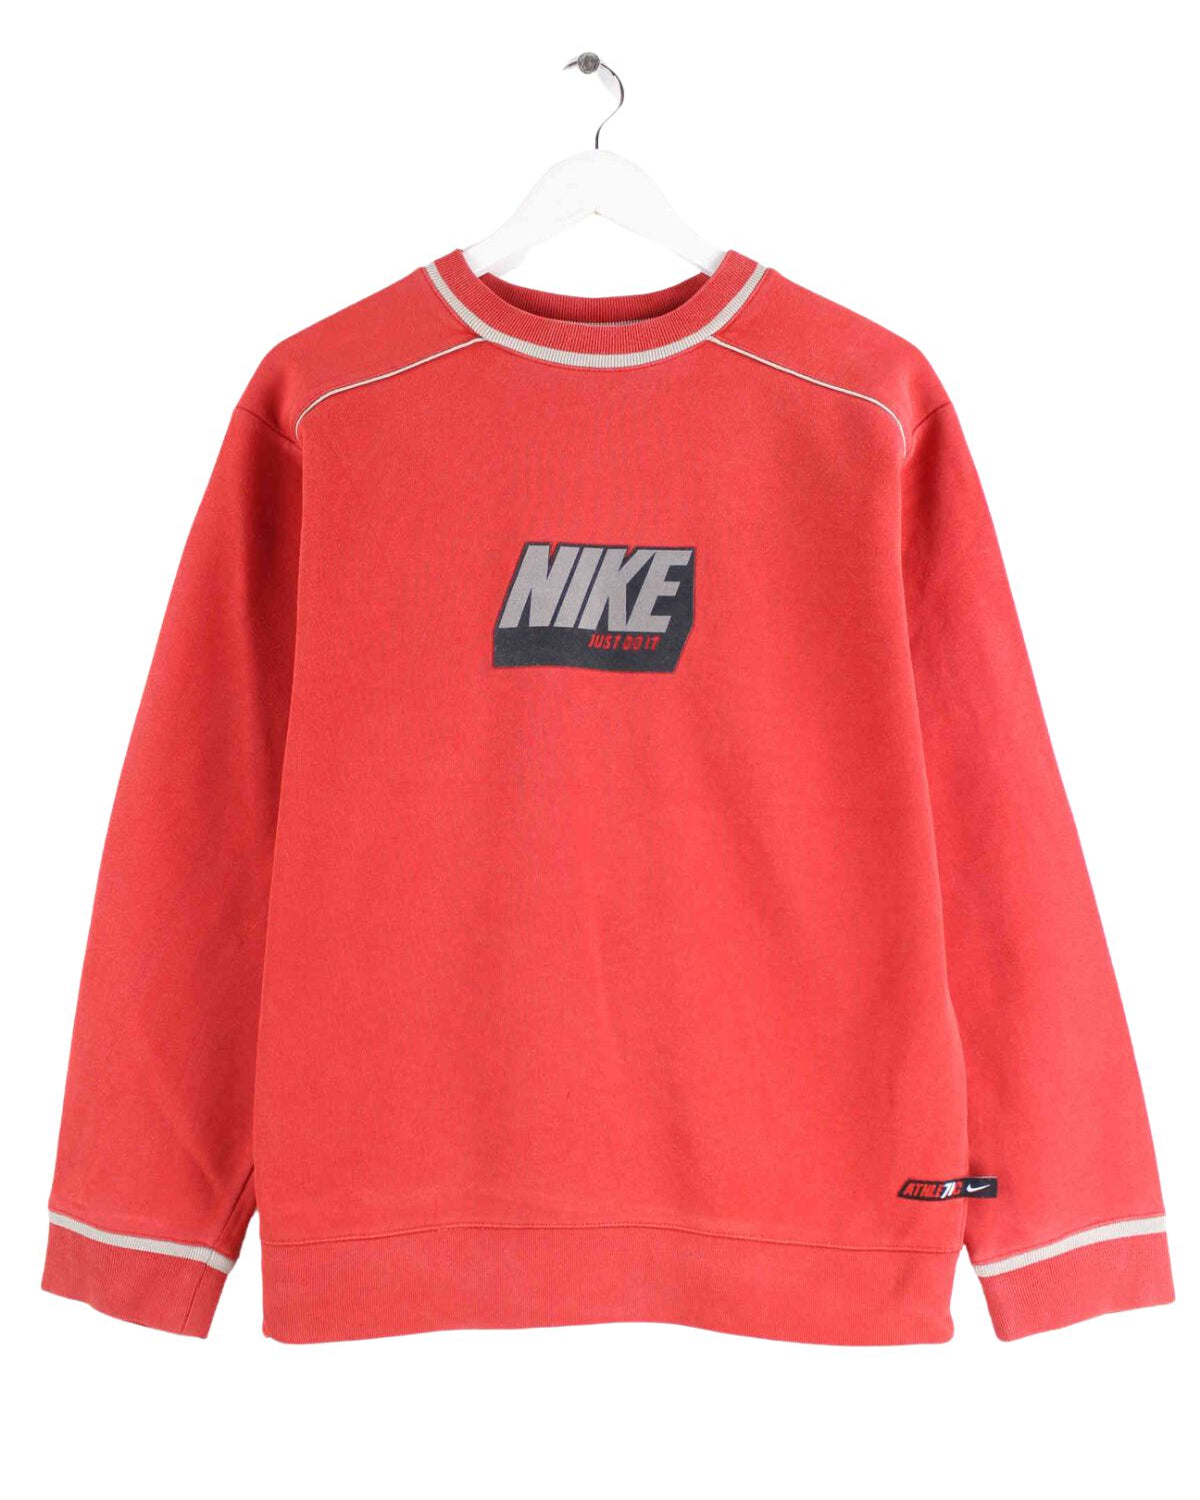 Nike y2k Athle71c Print Sweater Rot L (front image)